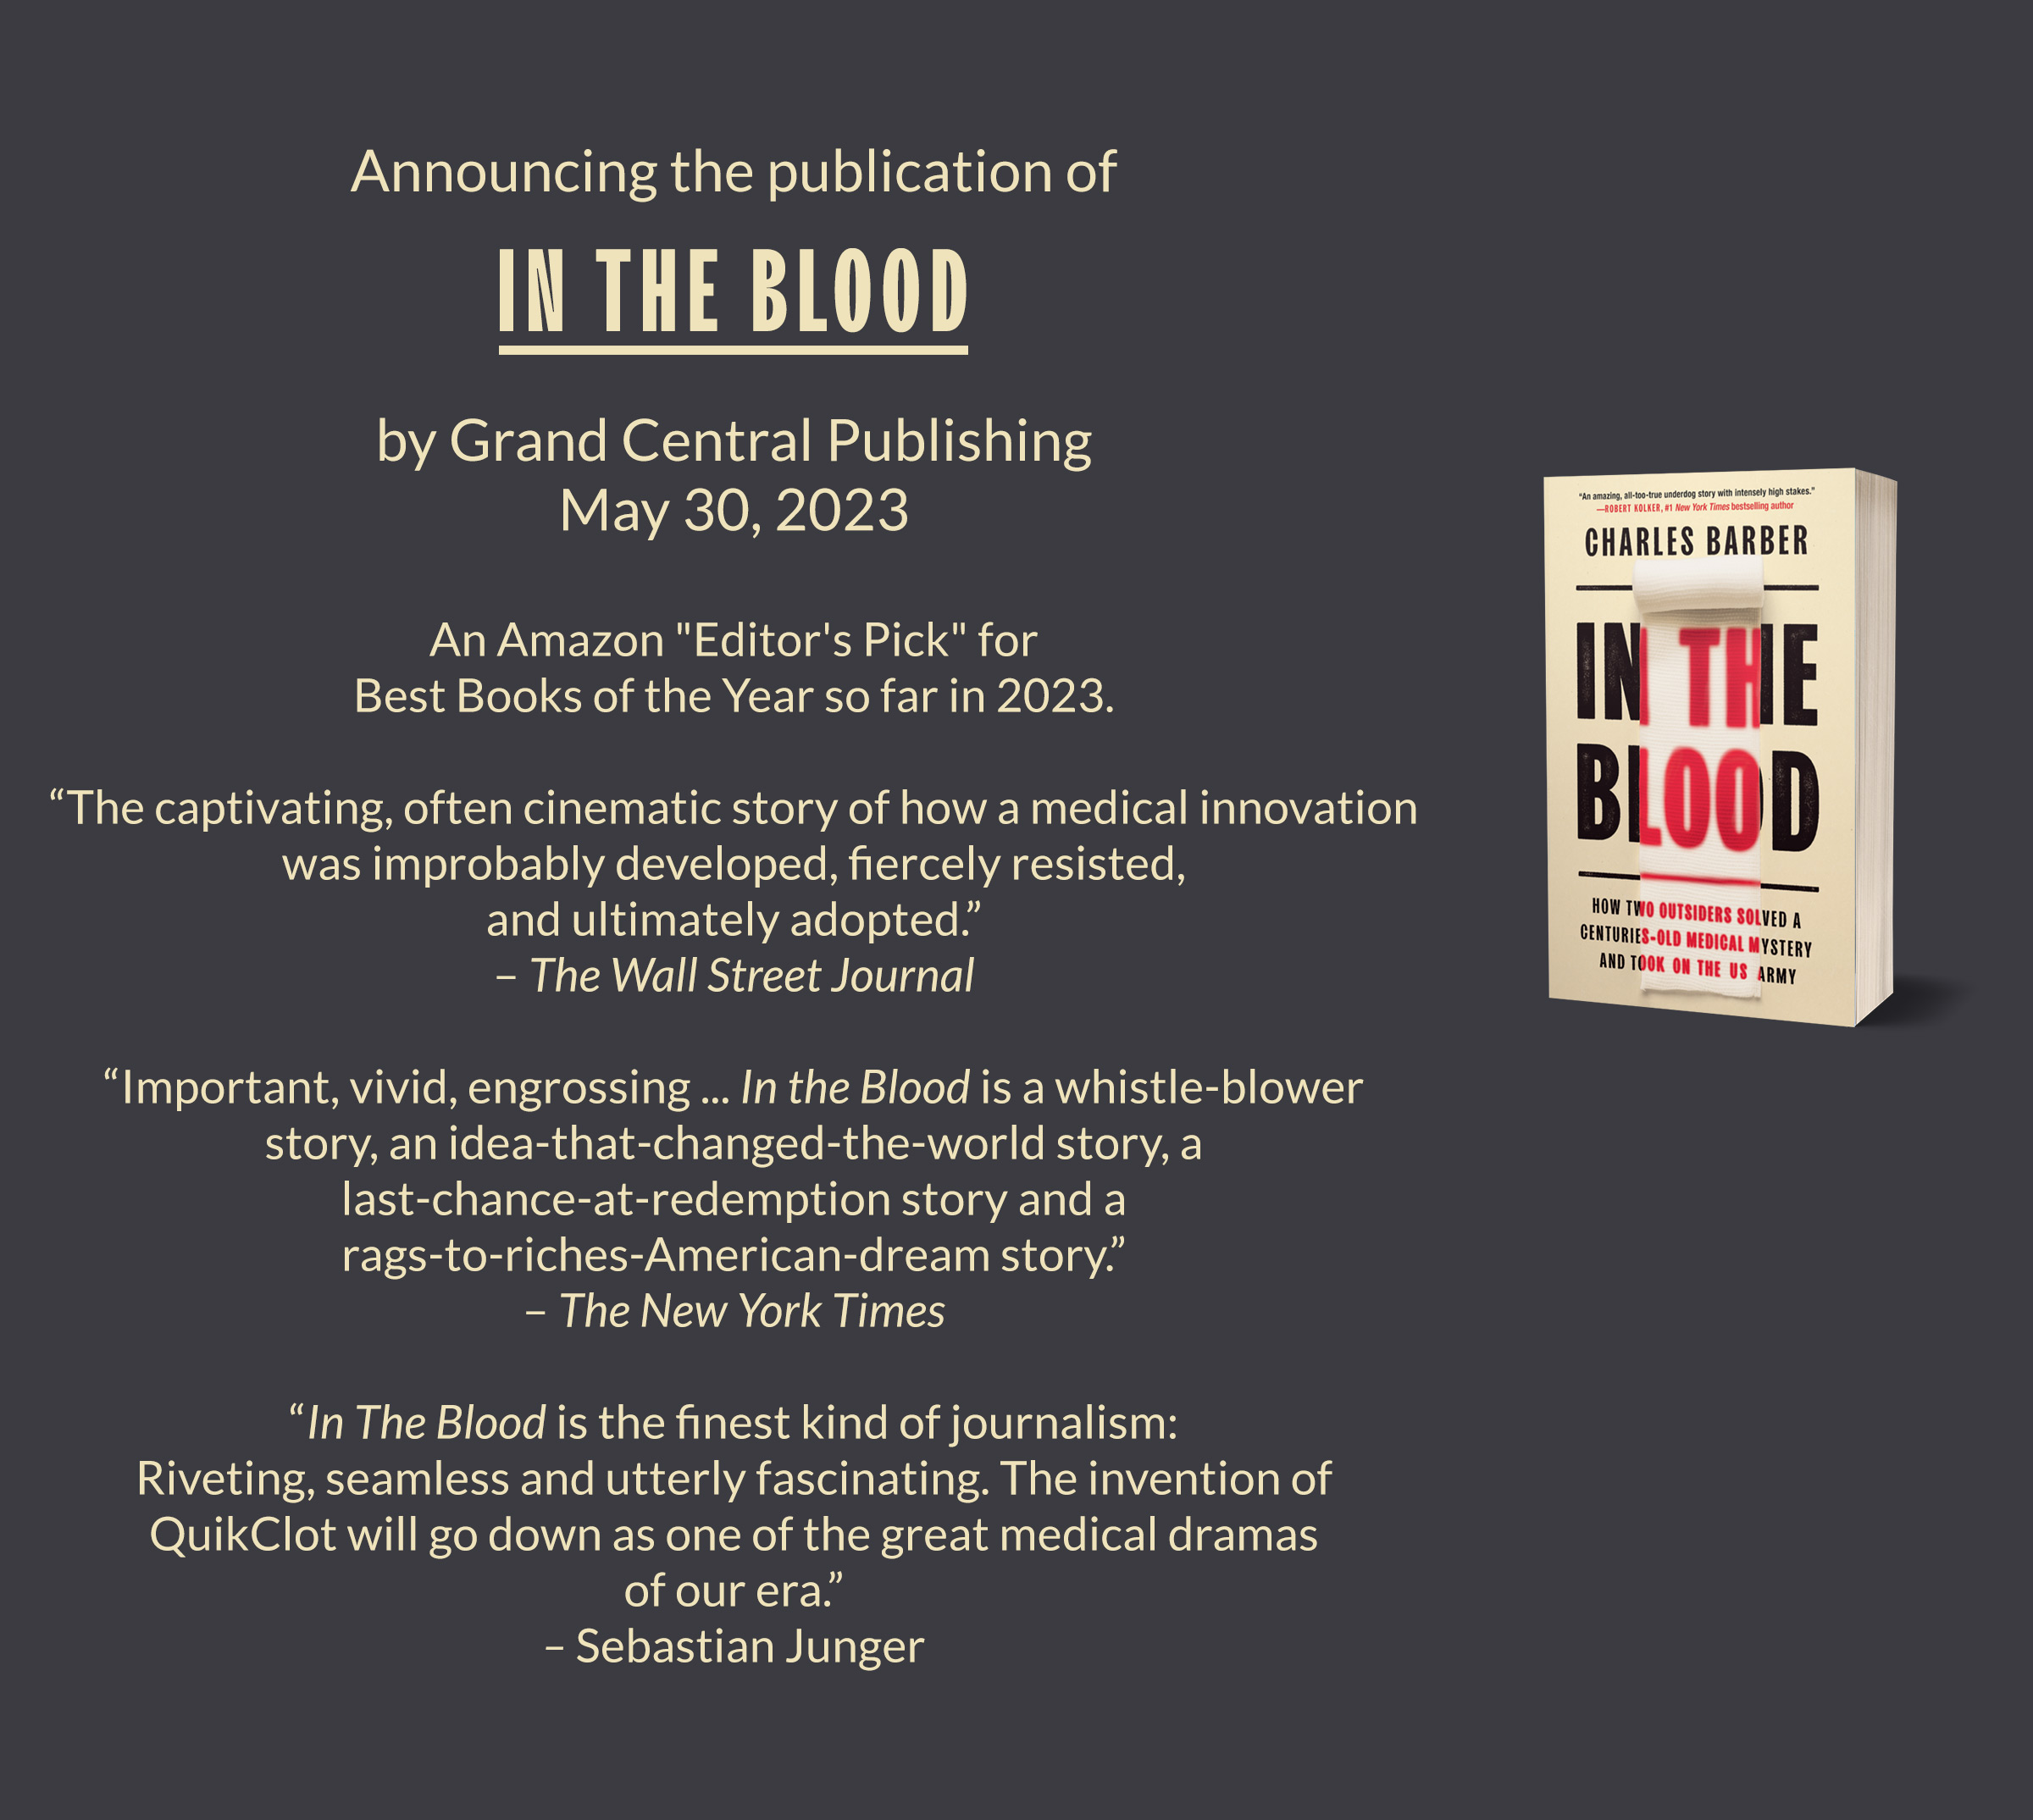 Announcing the publication of In The Blood by Grand Central Publishing May 30, 2023